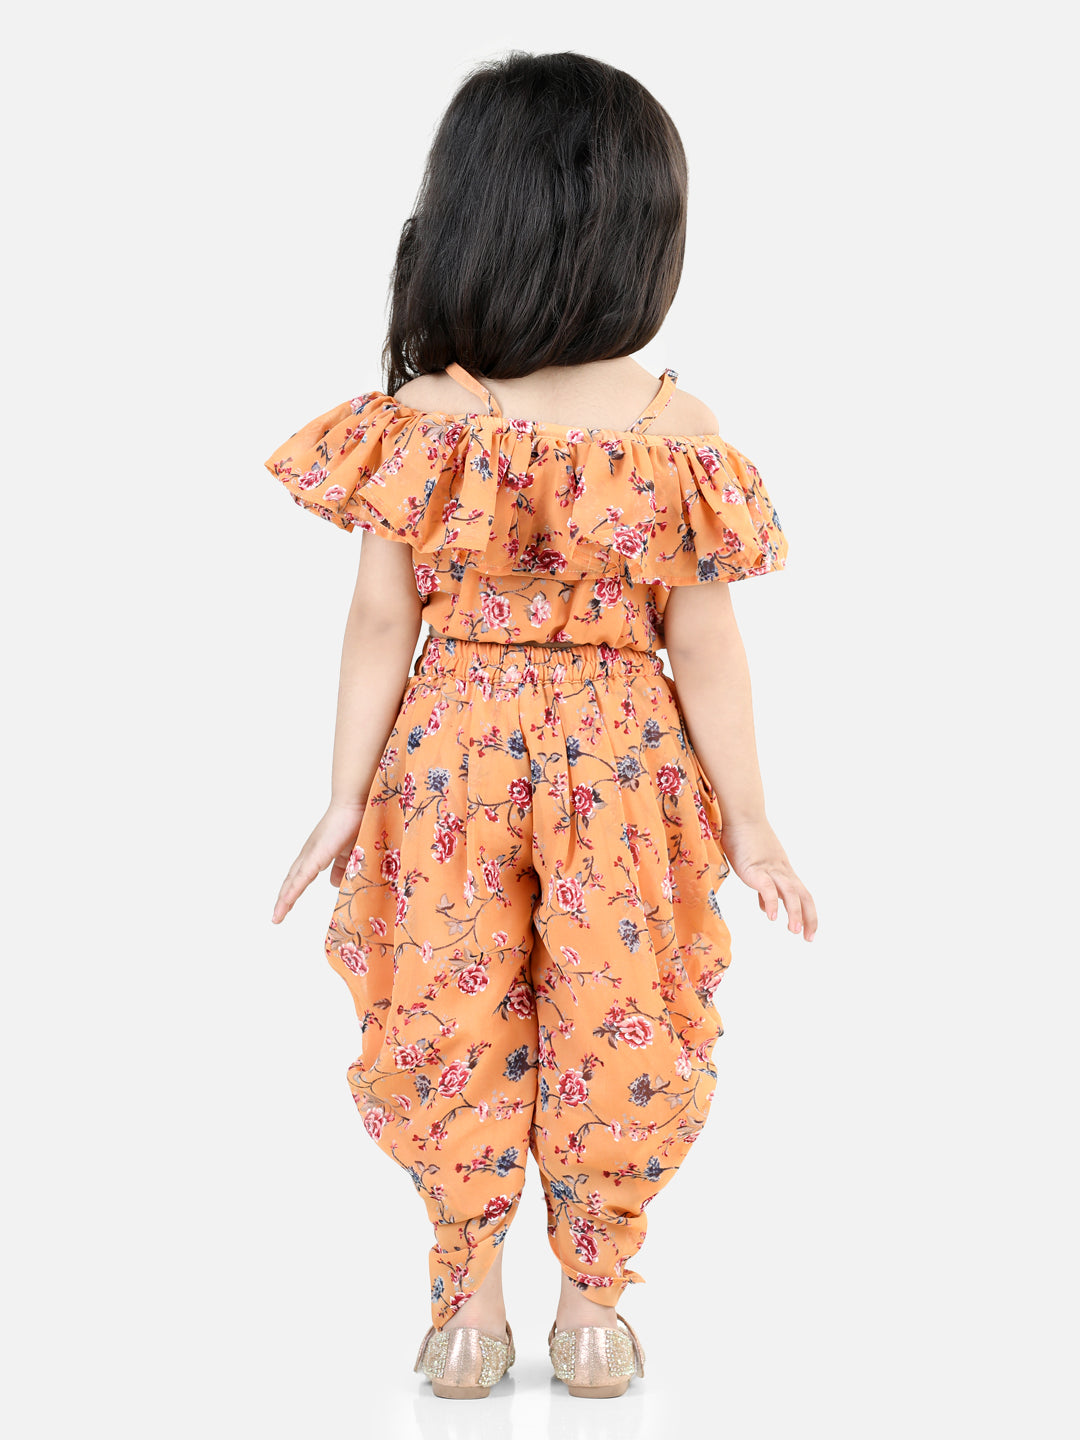 BownBee Girls Printed Ruffle Georgette Top with Dhoti Co Ord Clothing Sets- Orange